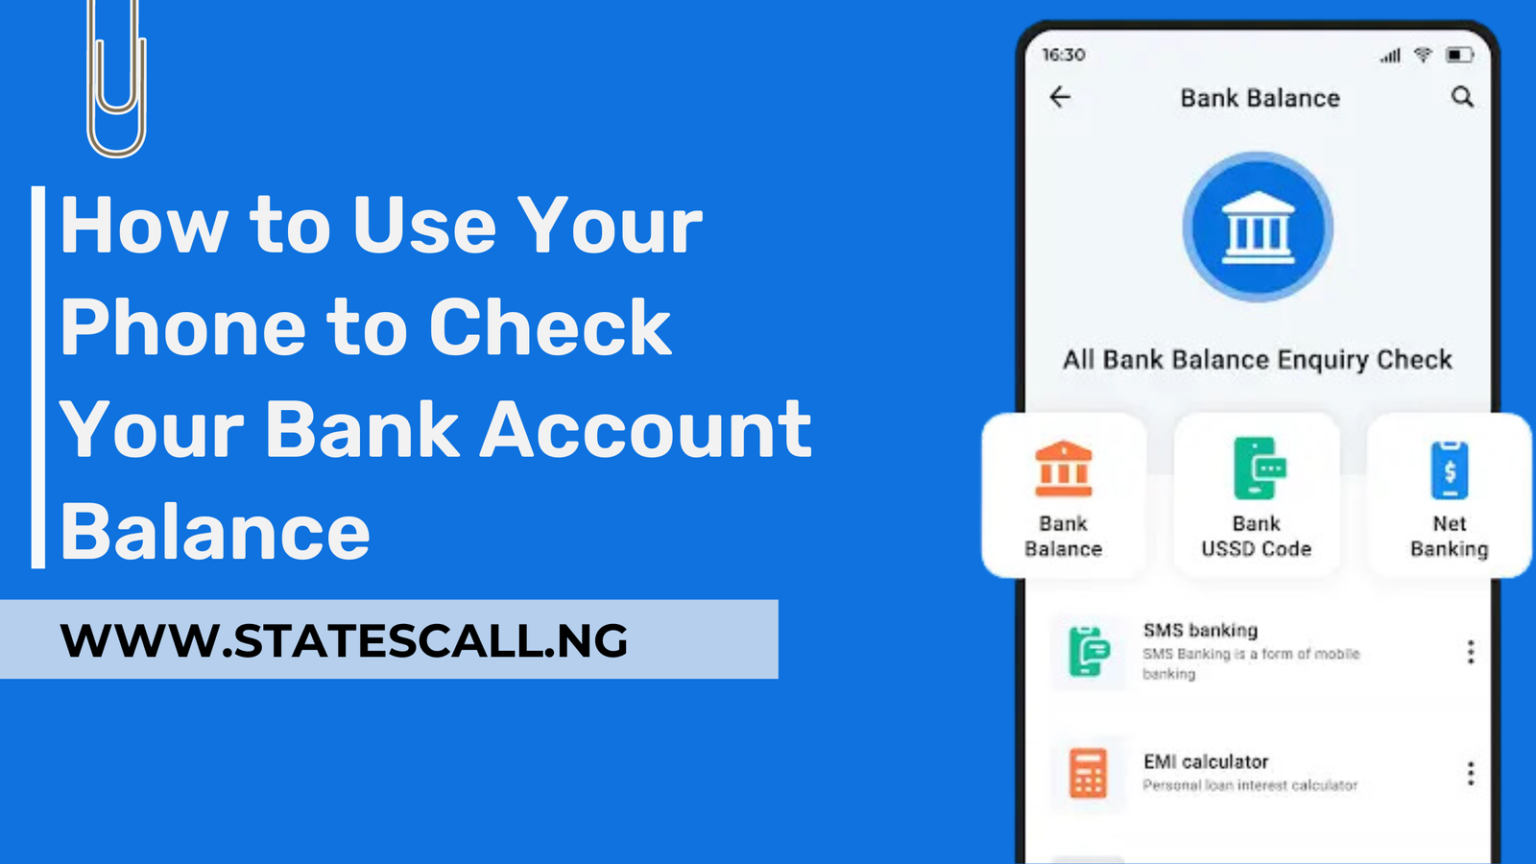 How To Use Your Phone To Check Your Account Balance - Statescall.ng